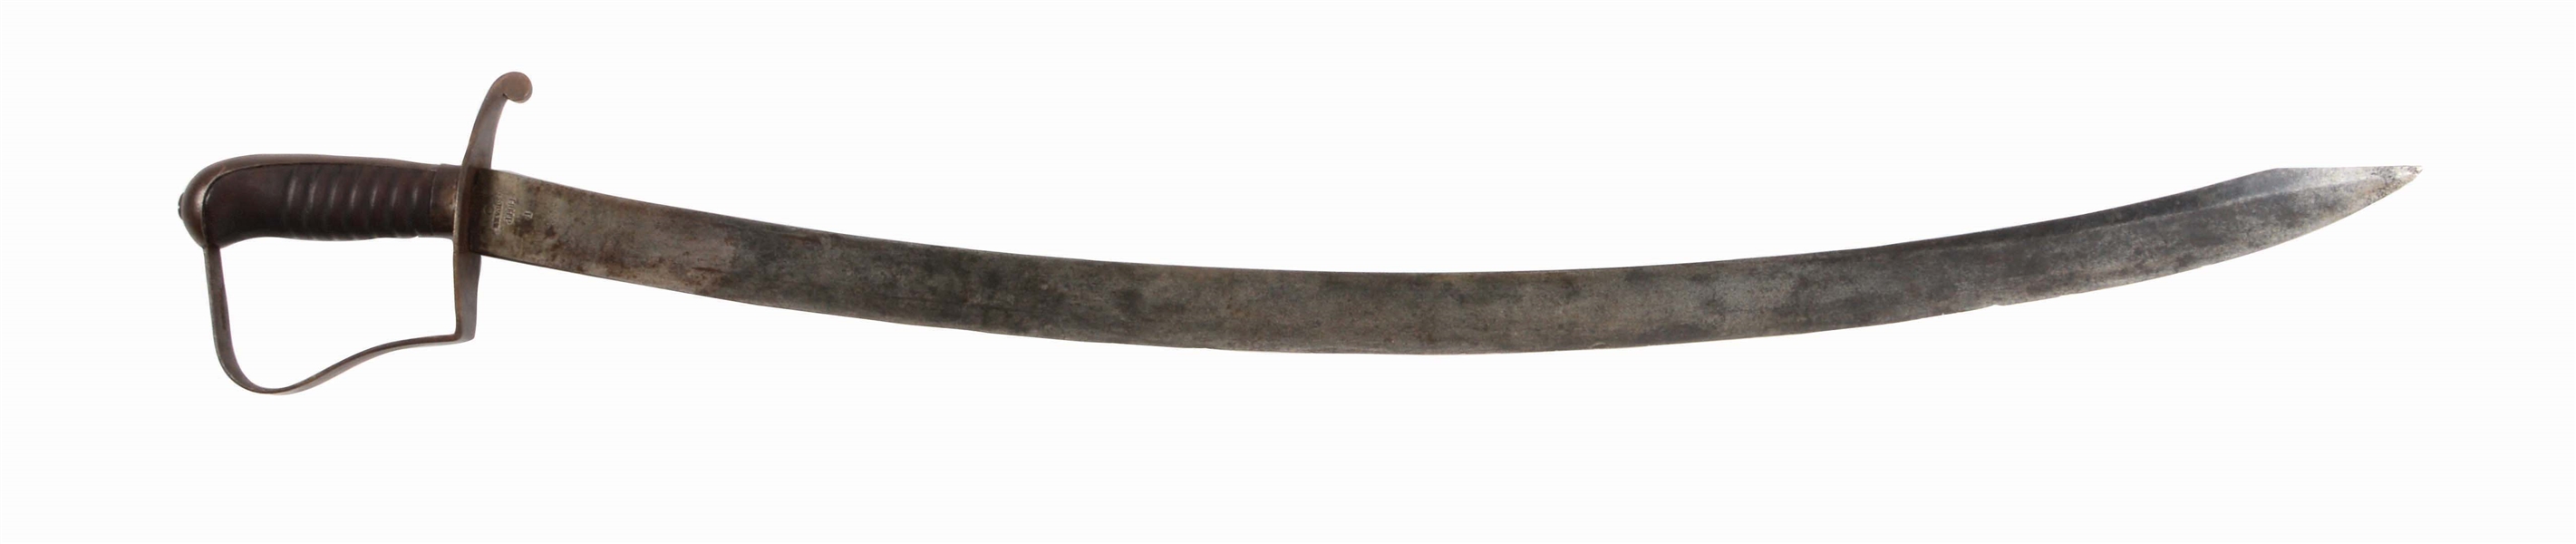 STARR CONTRACT 1812-1813 CAVALRY SABER.